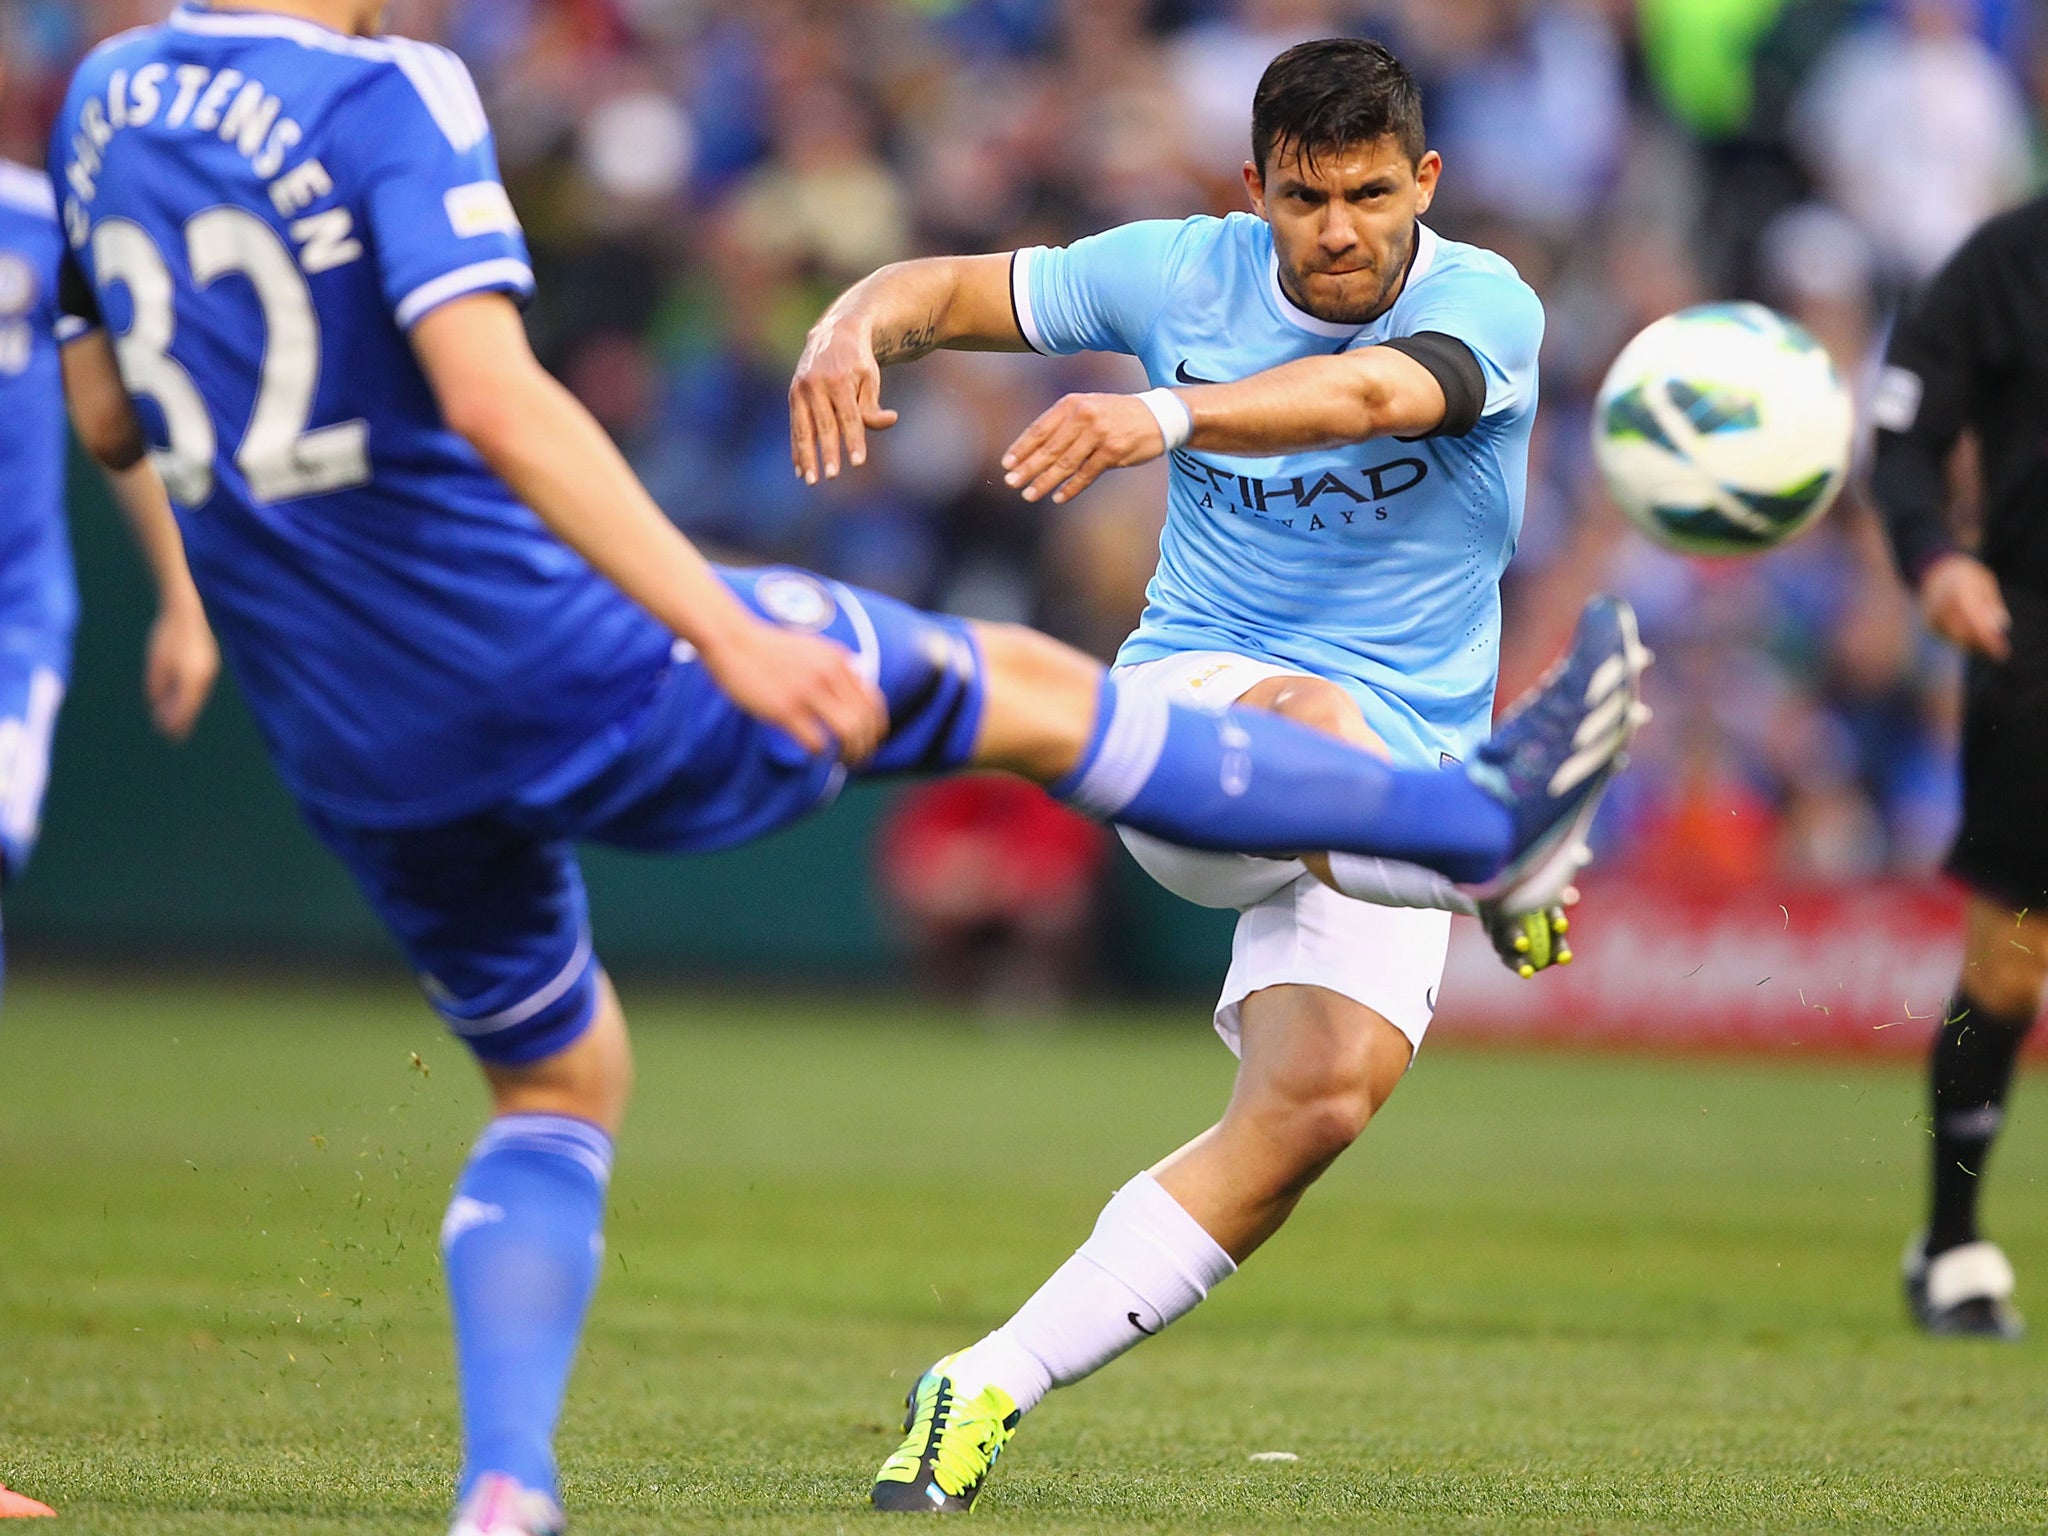 Sergio Aguero #16 of Manchester City takes a shot on goal against the Chelsea during a friendly match at Busch Stadium on May 23, 2013 in St. Louis, Missouri